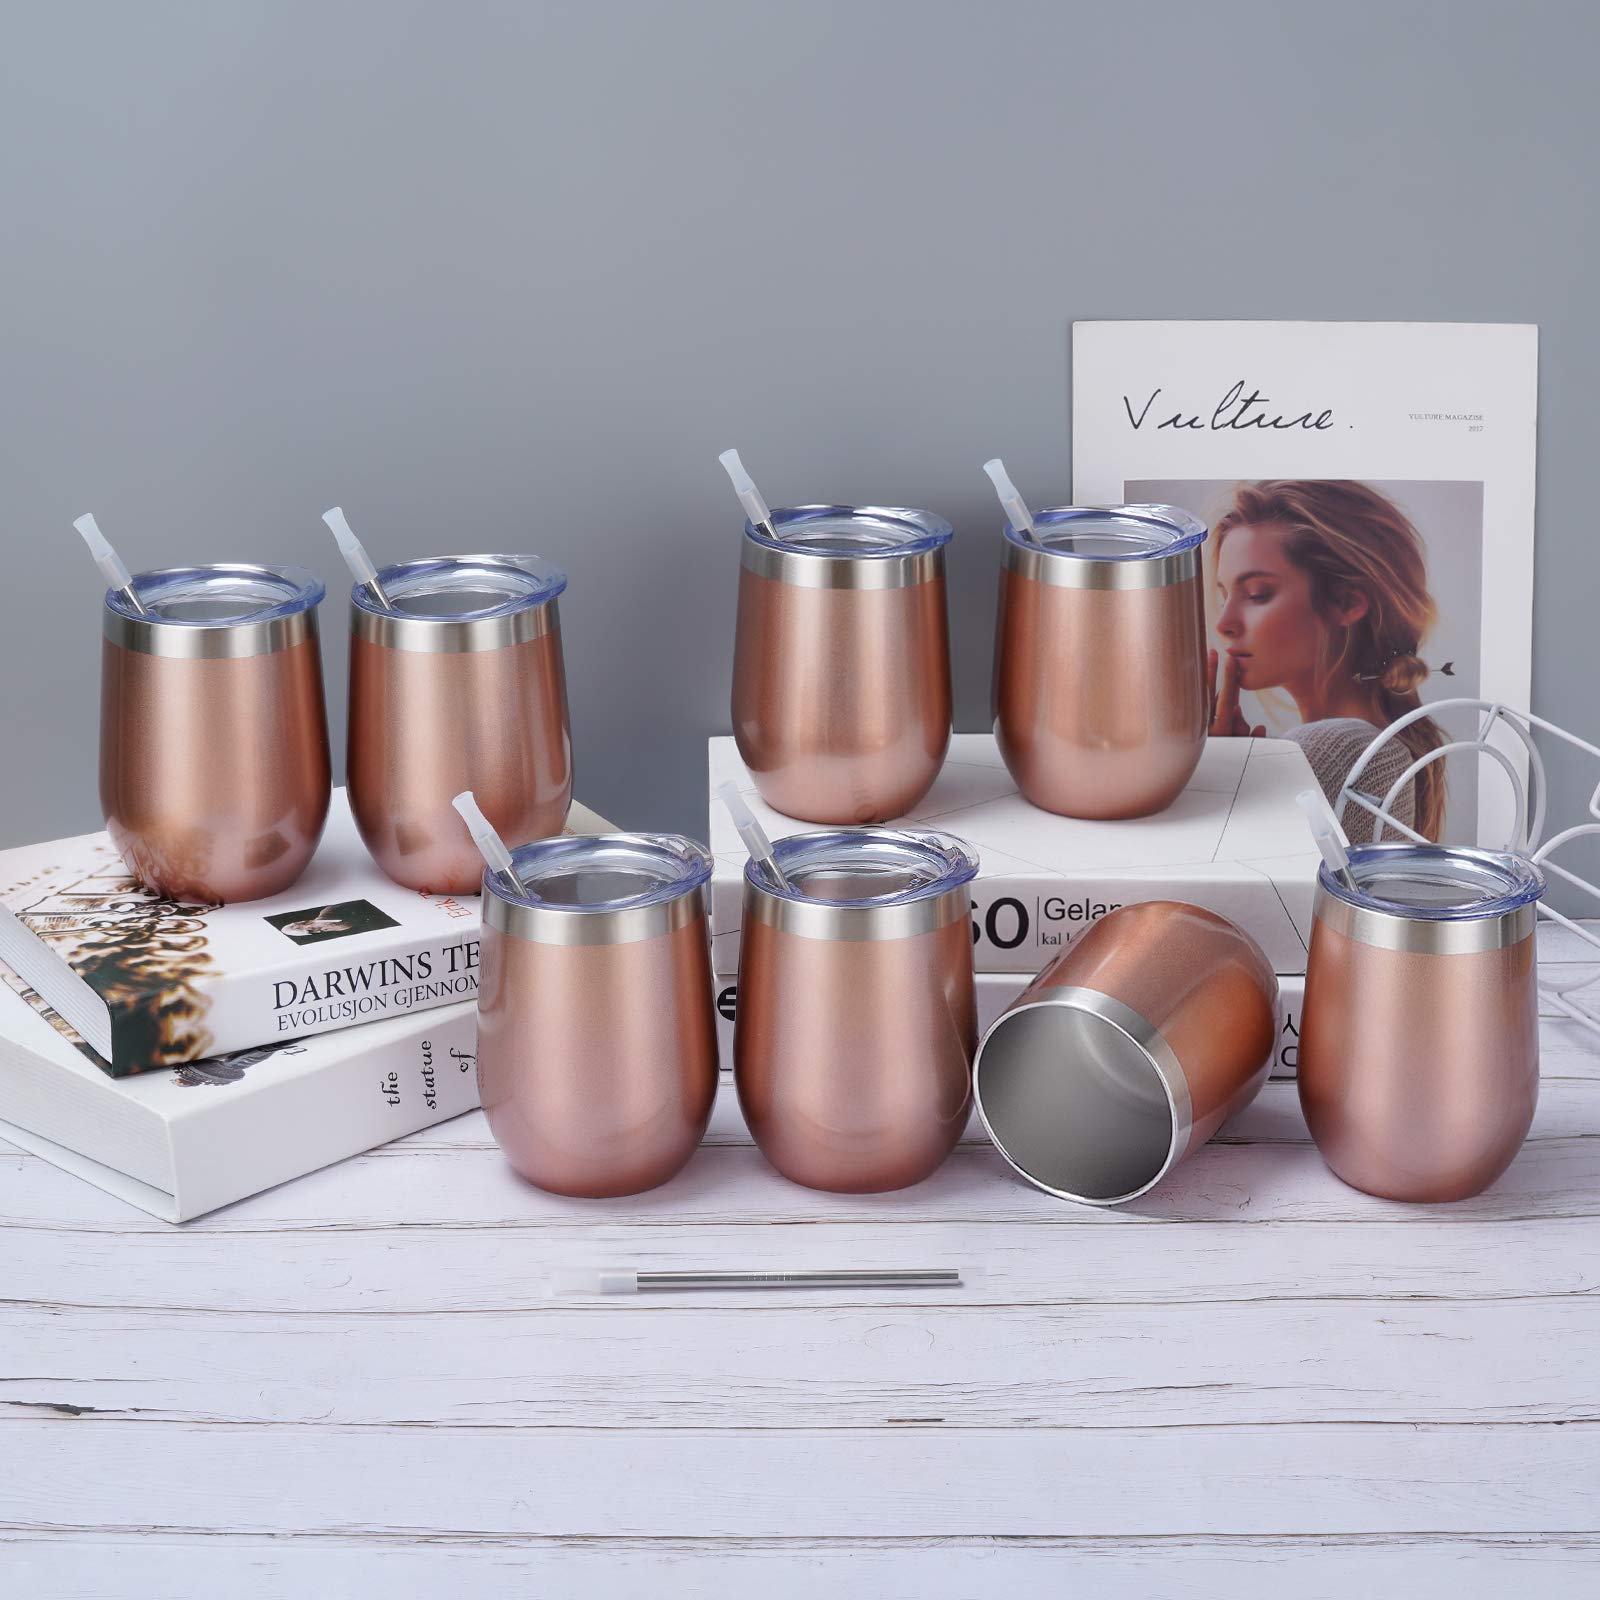 8 Pack 12 Oz Stainless Steel Stemless Wine Tumbler with Lid and Straw, Double Wall Vacuum Insulated Wine Glass for Wine, Coffee, Cocktails, Champagne, Ice Cream, Outdoor, Picnic, Set of 8, Rose Gold